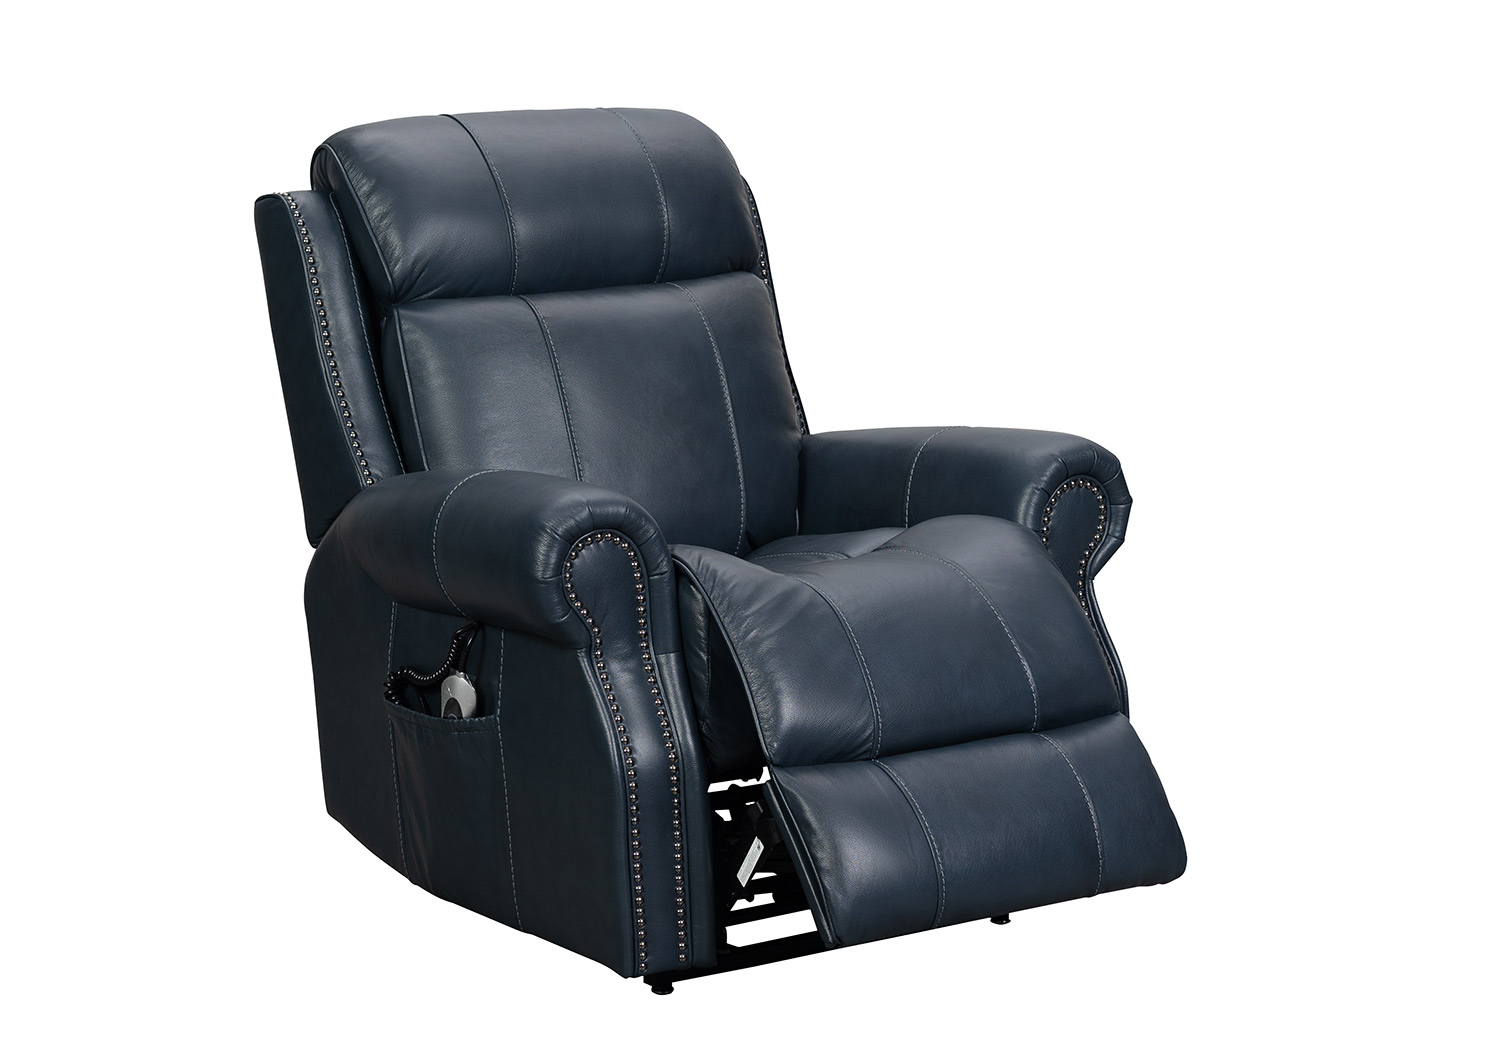 Barcalounger Langston Lift Chair Recliner with Power Head Rest and Lumbar - Venzia Blue/Leather Match